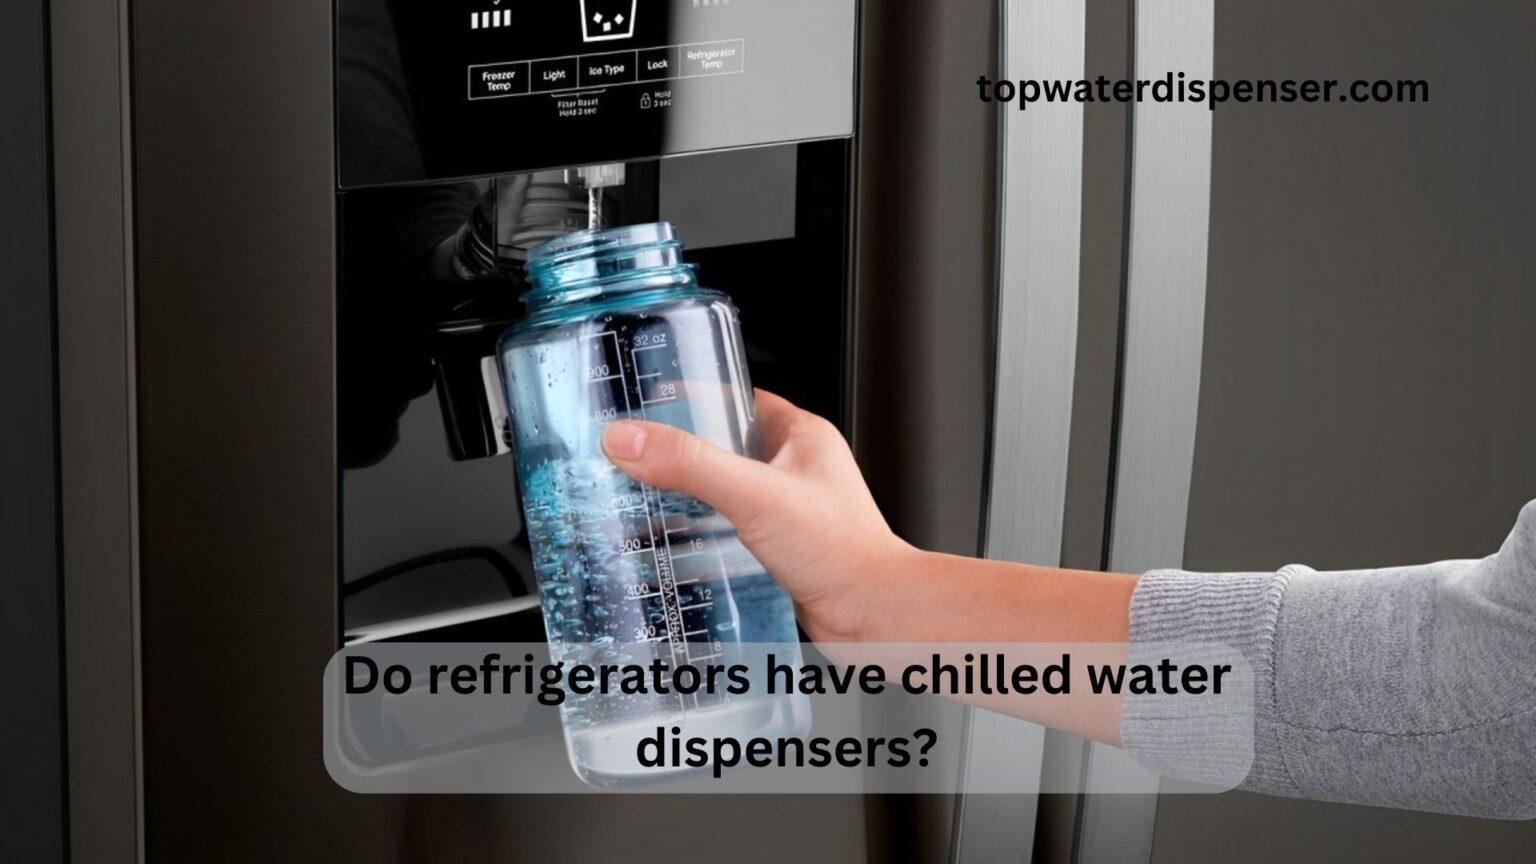 Do refrigerators have chilled water dispensers?